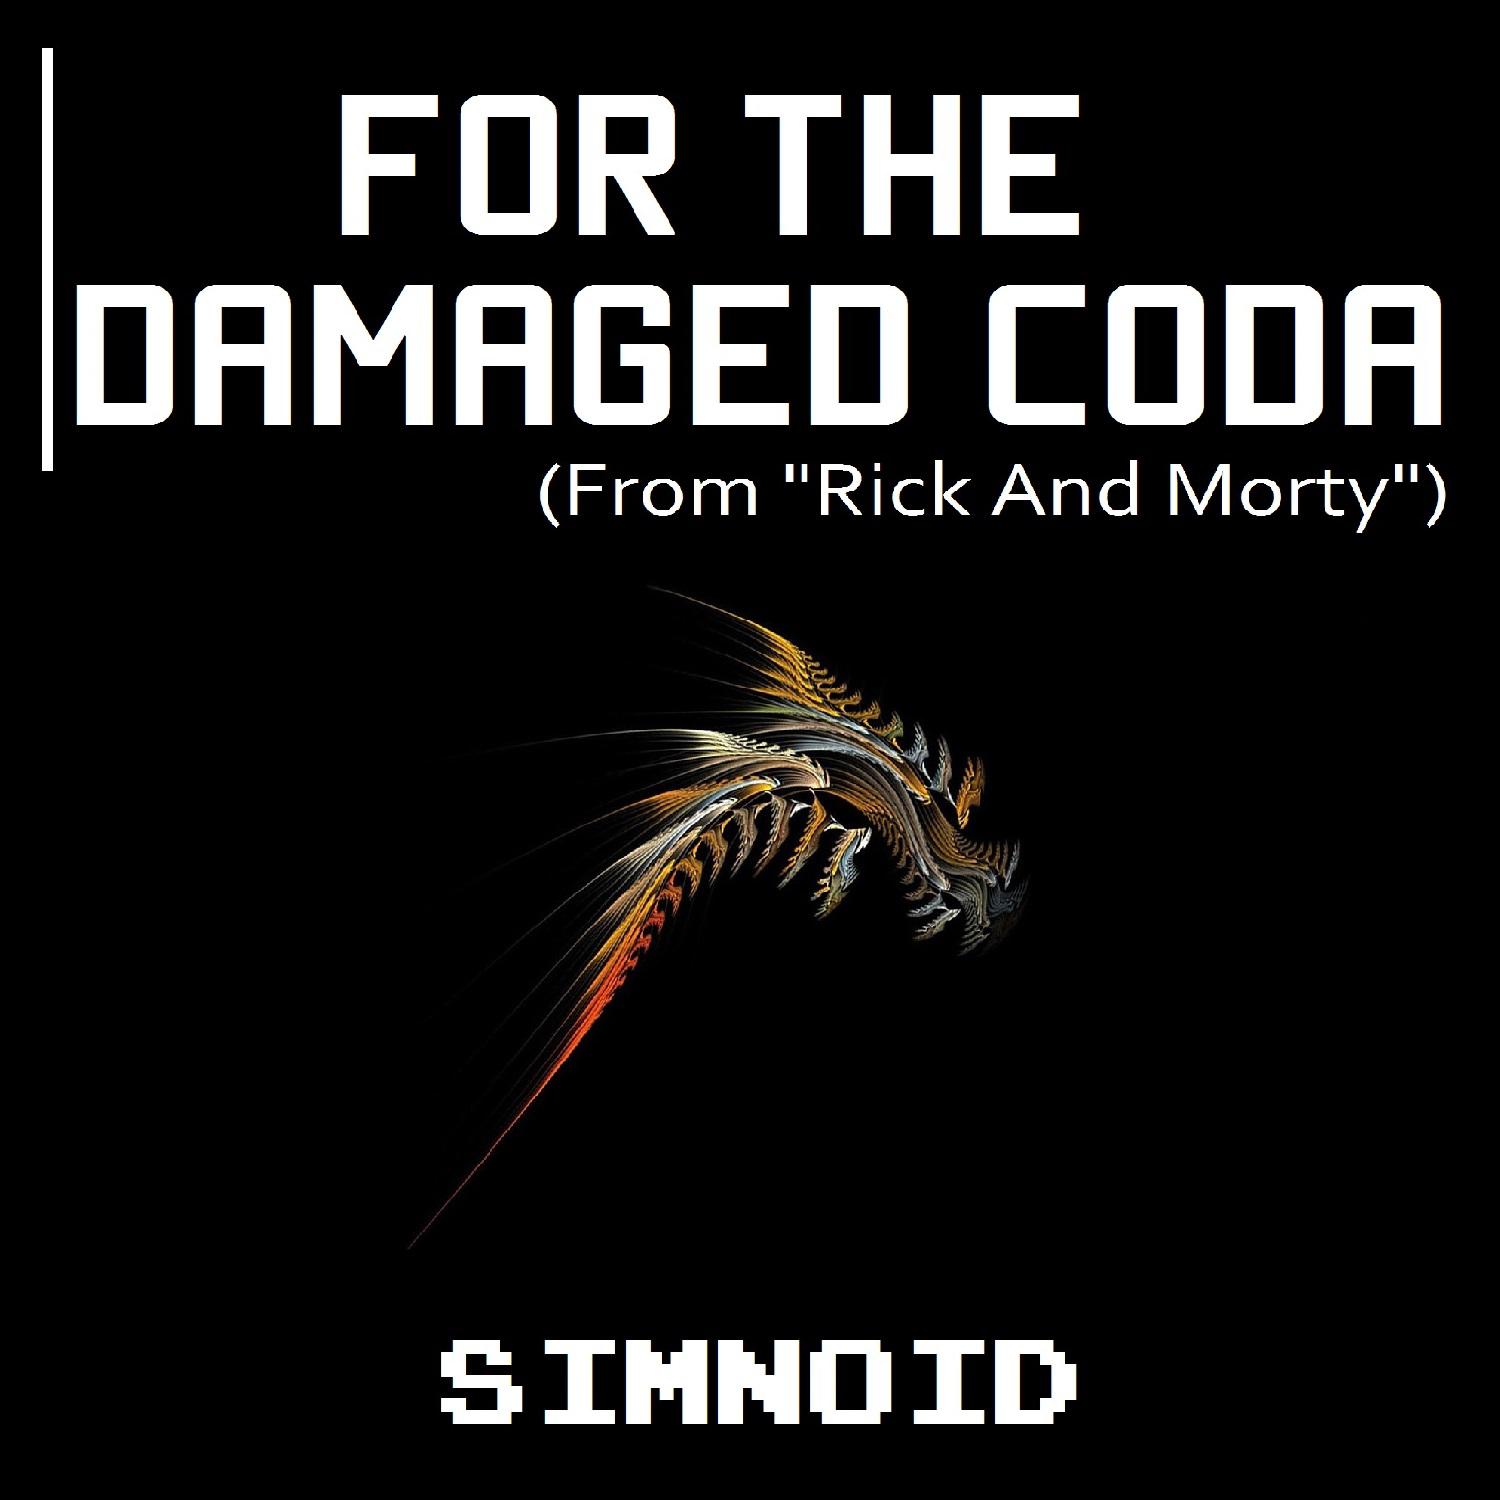 for the damaged coda download mp3